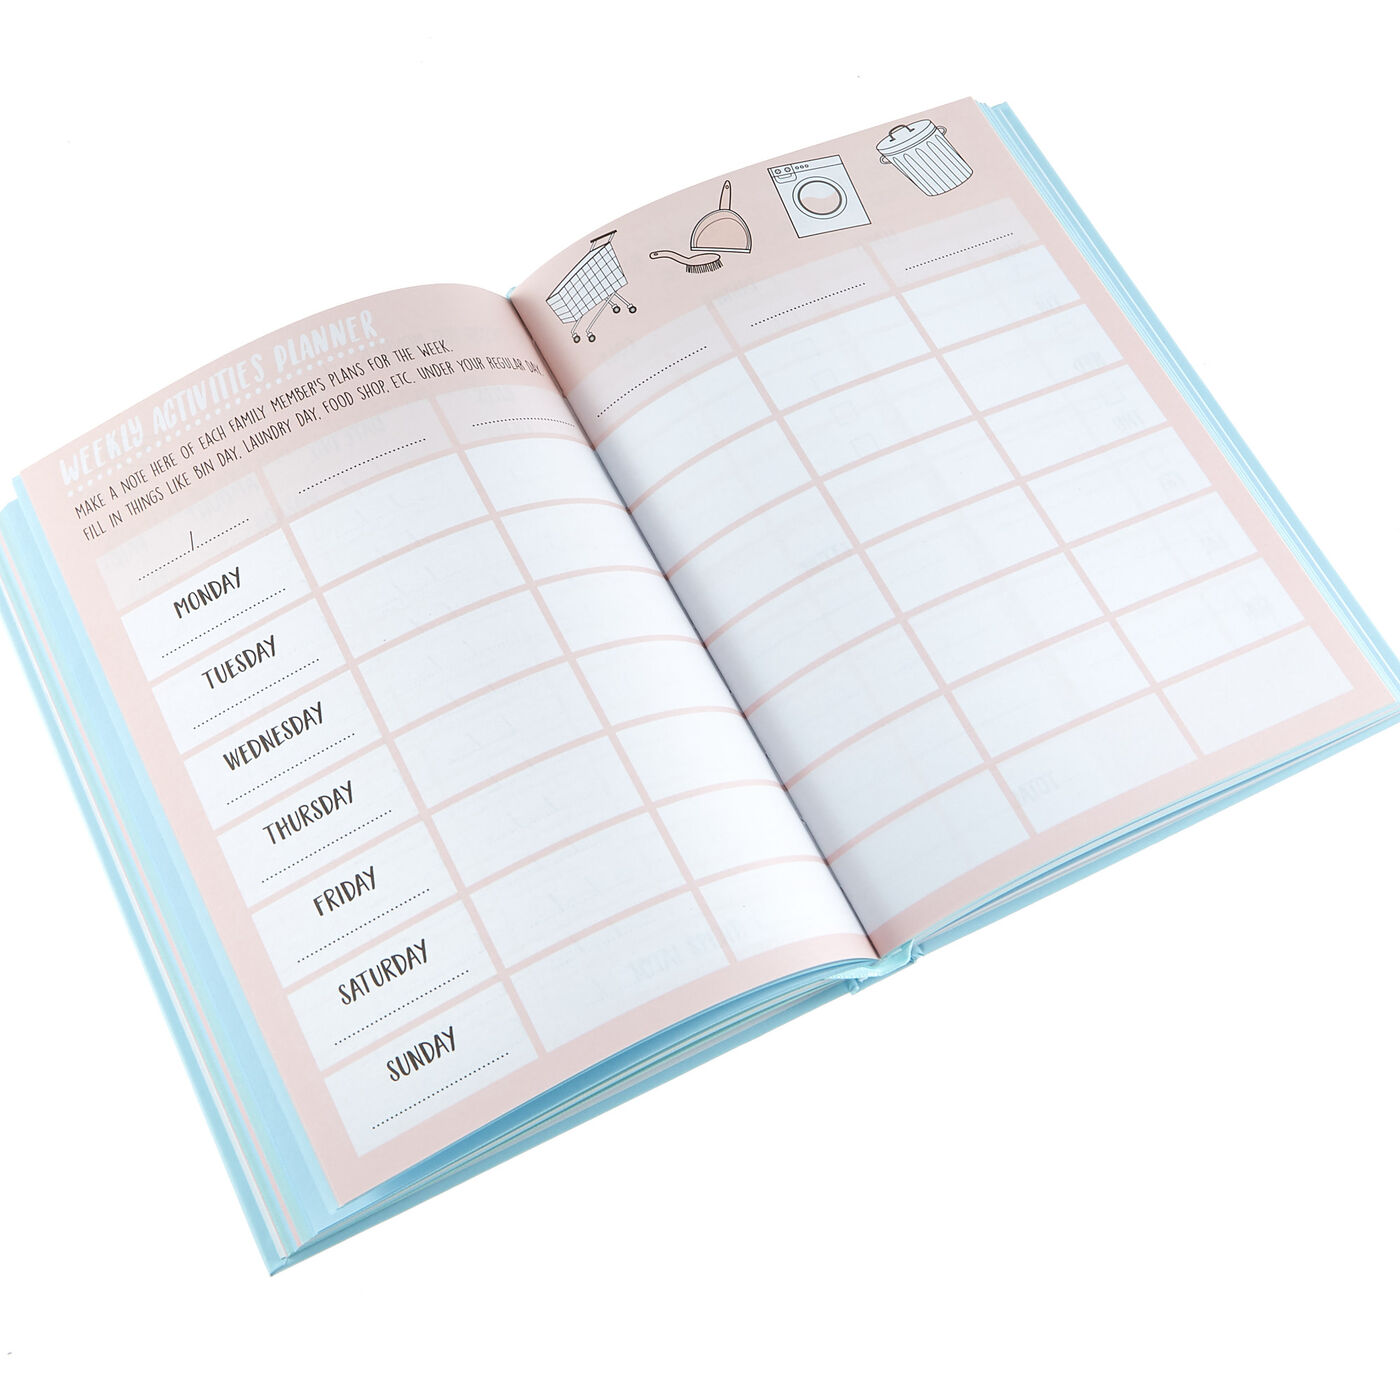 Buy Sort your Life out Household Planner for GBP 3.99